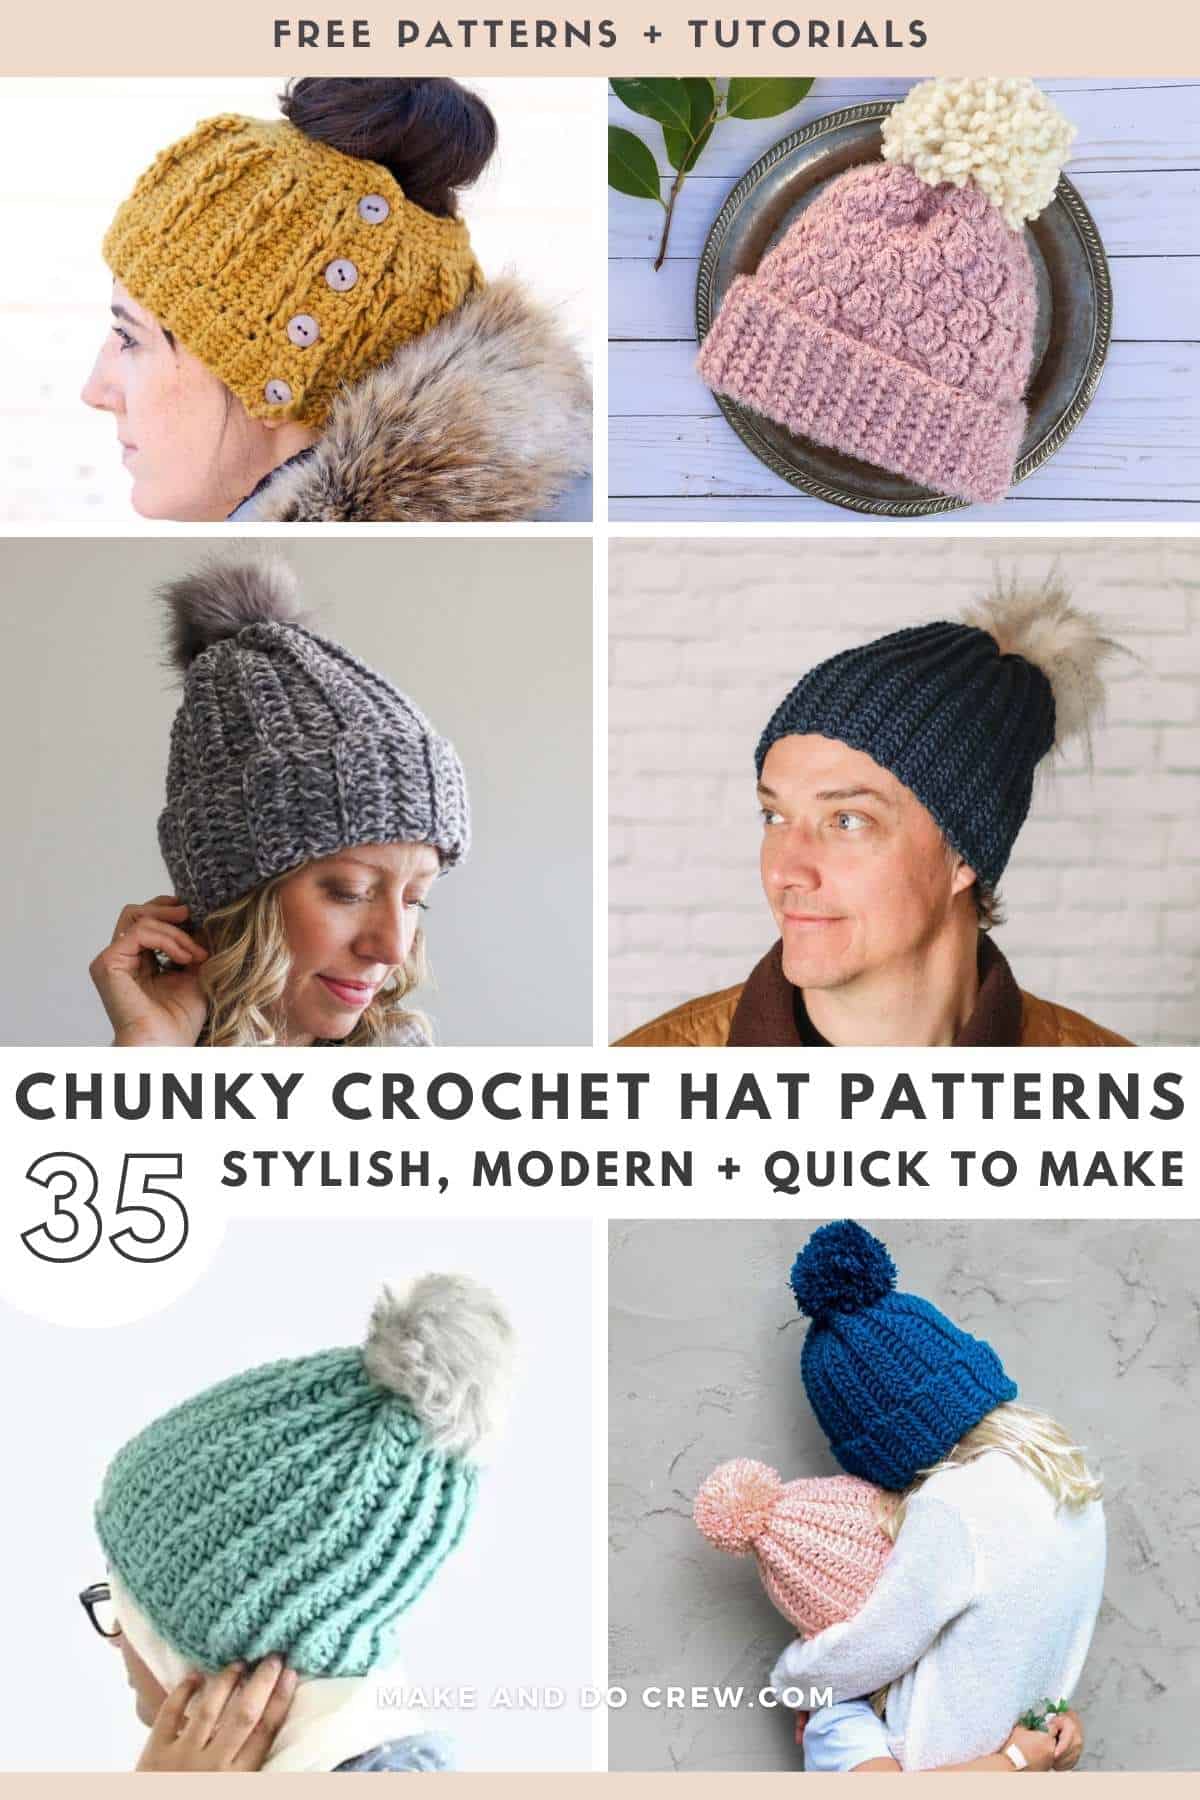 A collage of six photos of different chunky crochet hats. A mustard yellow ponytail crochet hat. A pink chunky crochet hat with a white yarn pompom. A gray chunky crochet hat with a furry pompom. A dark blue crochet beanie with furry pompom. A mint green chunky crochet beanie with furry pompom. Two kids wearing chunky crochet beanies in colors pink and blue with yarn pompoms.